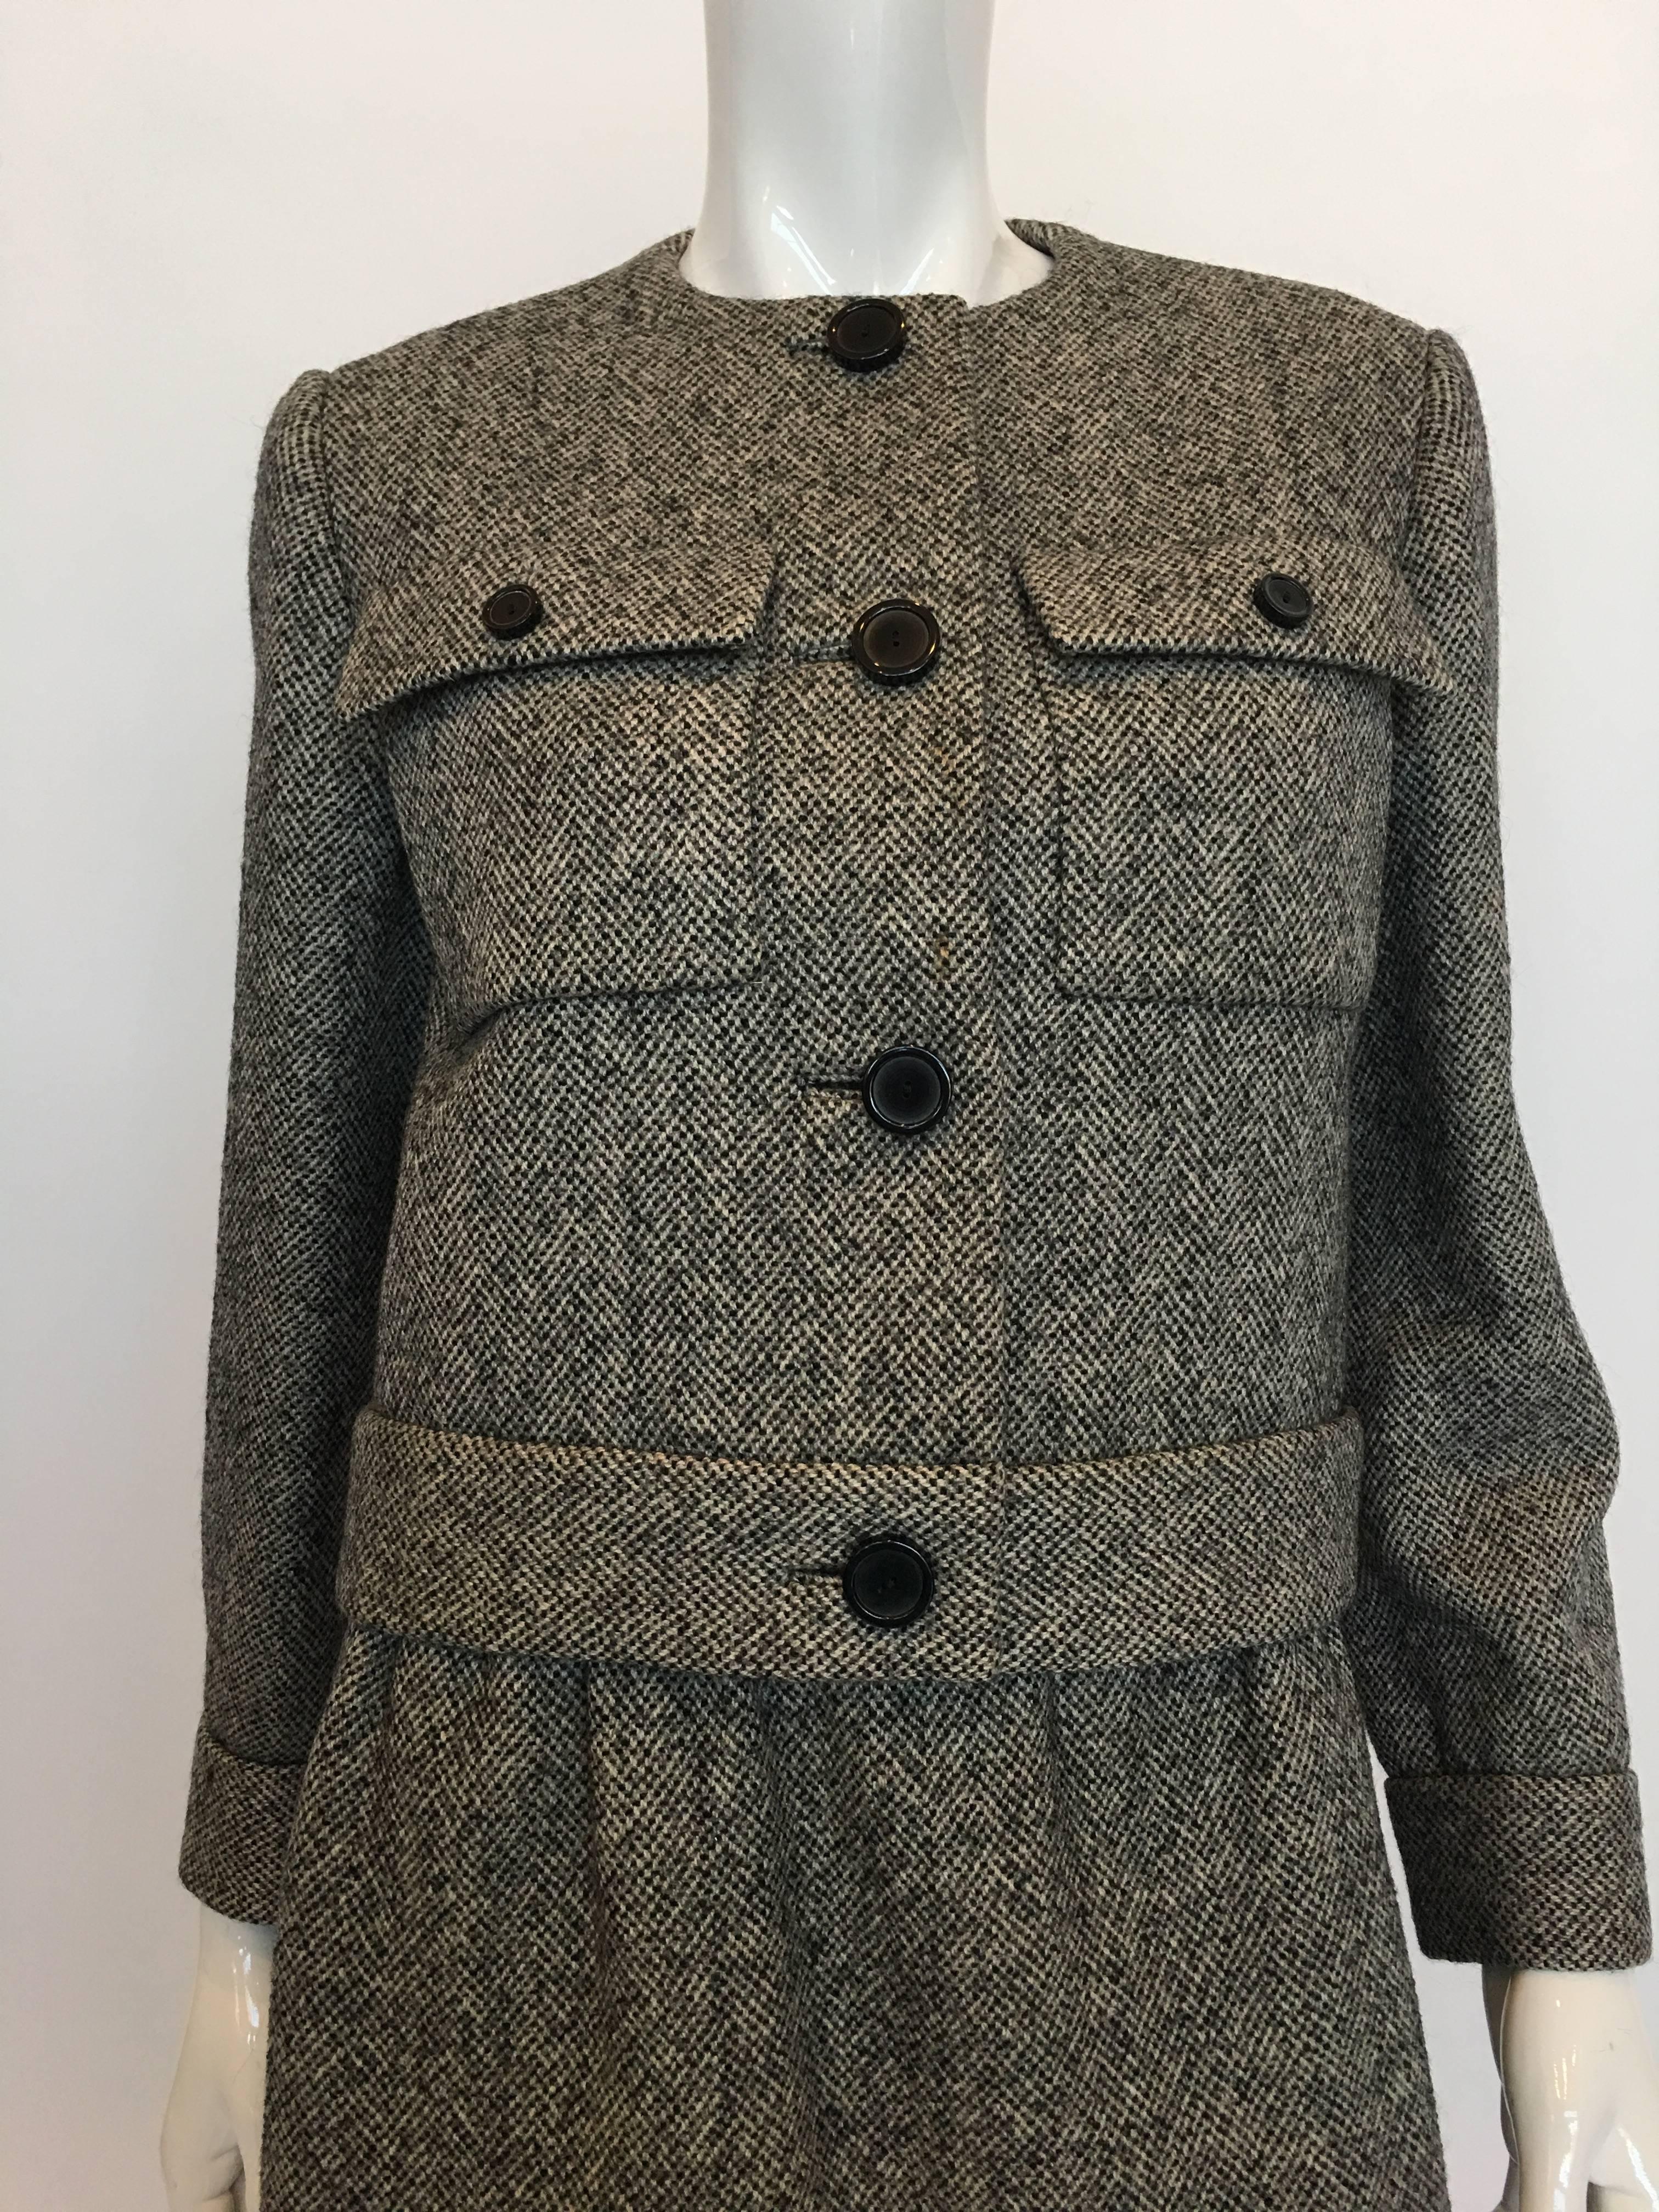 Norell Vintage 1960's Tweed Skirt Suit with inset button holes and 2 front patch pockets. Skirt is lined and has a side sipper with hook closure.

*ALL MEASUREMENTS TAKEN FLAT*

Jacket
Shoulder to shoulder: 15.5